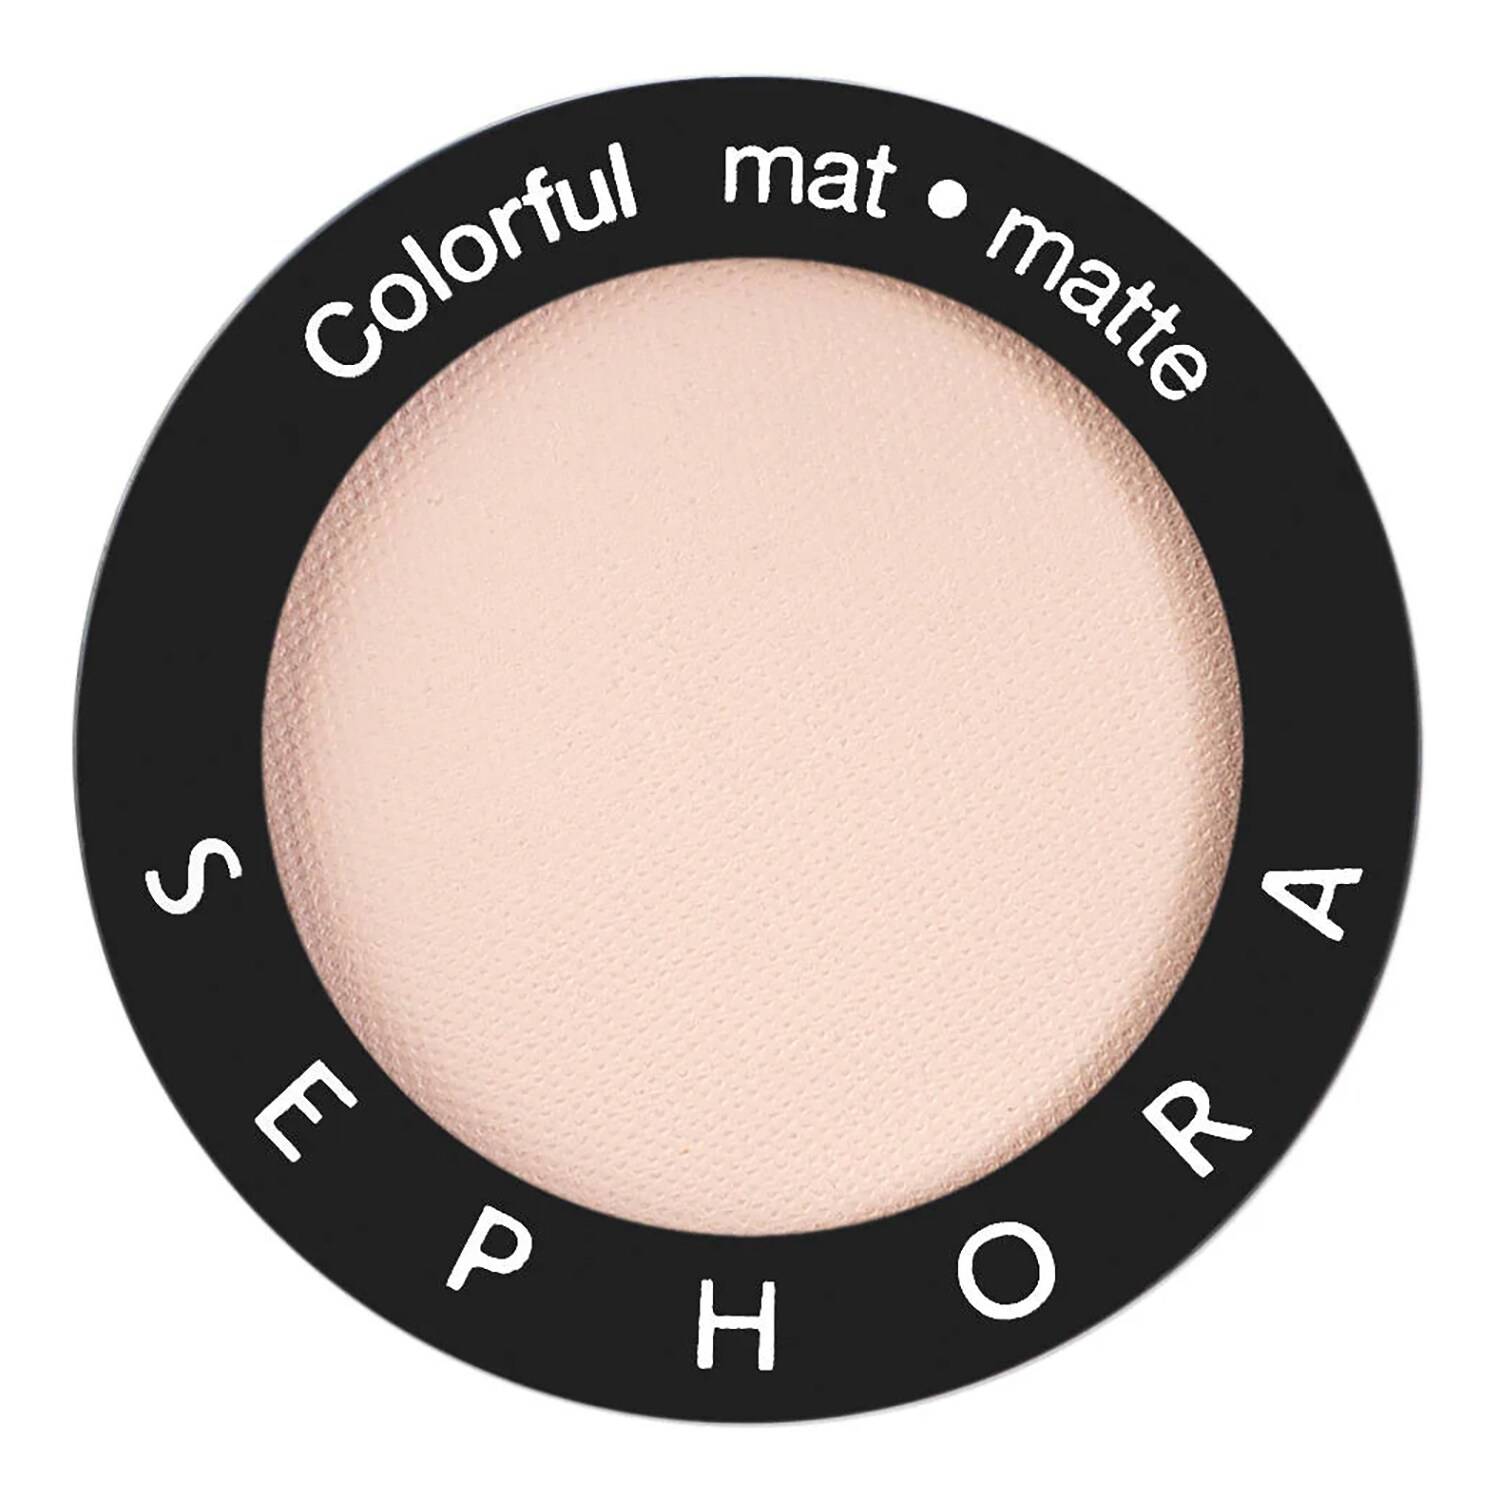 Sephora Collection Colorful - Eyeshadow 207 Lazy Afternoon - Matte